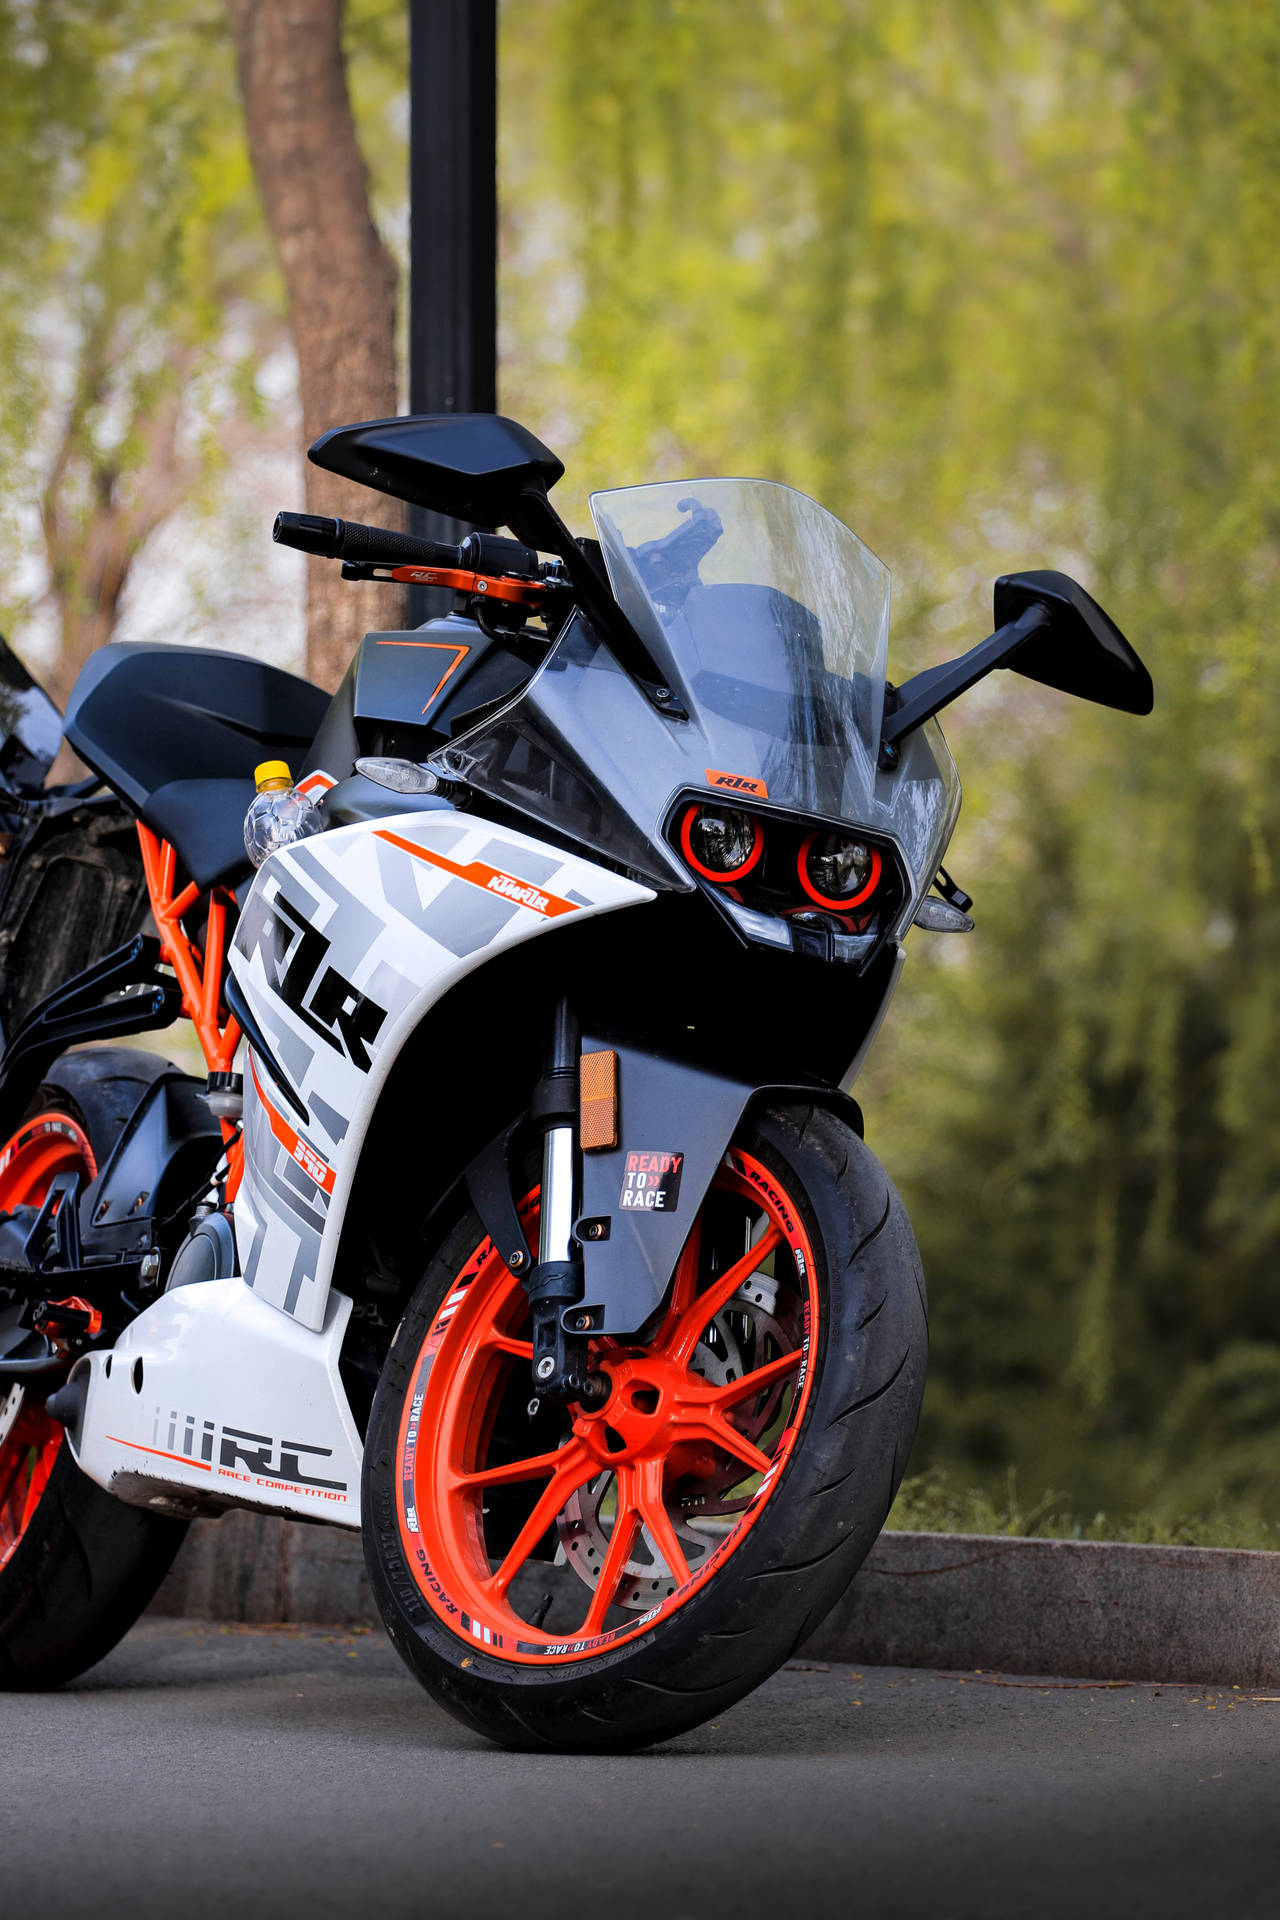 Free Ktm Rc 390 Pictures , [100+] Ktm Rc 390 Pictures for FREE | Wallpapers .com